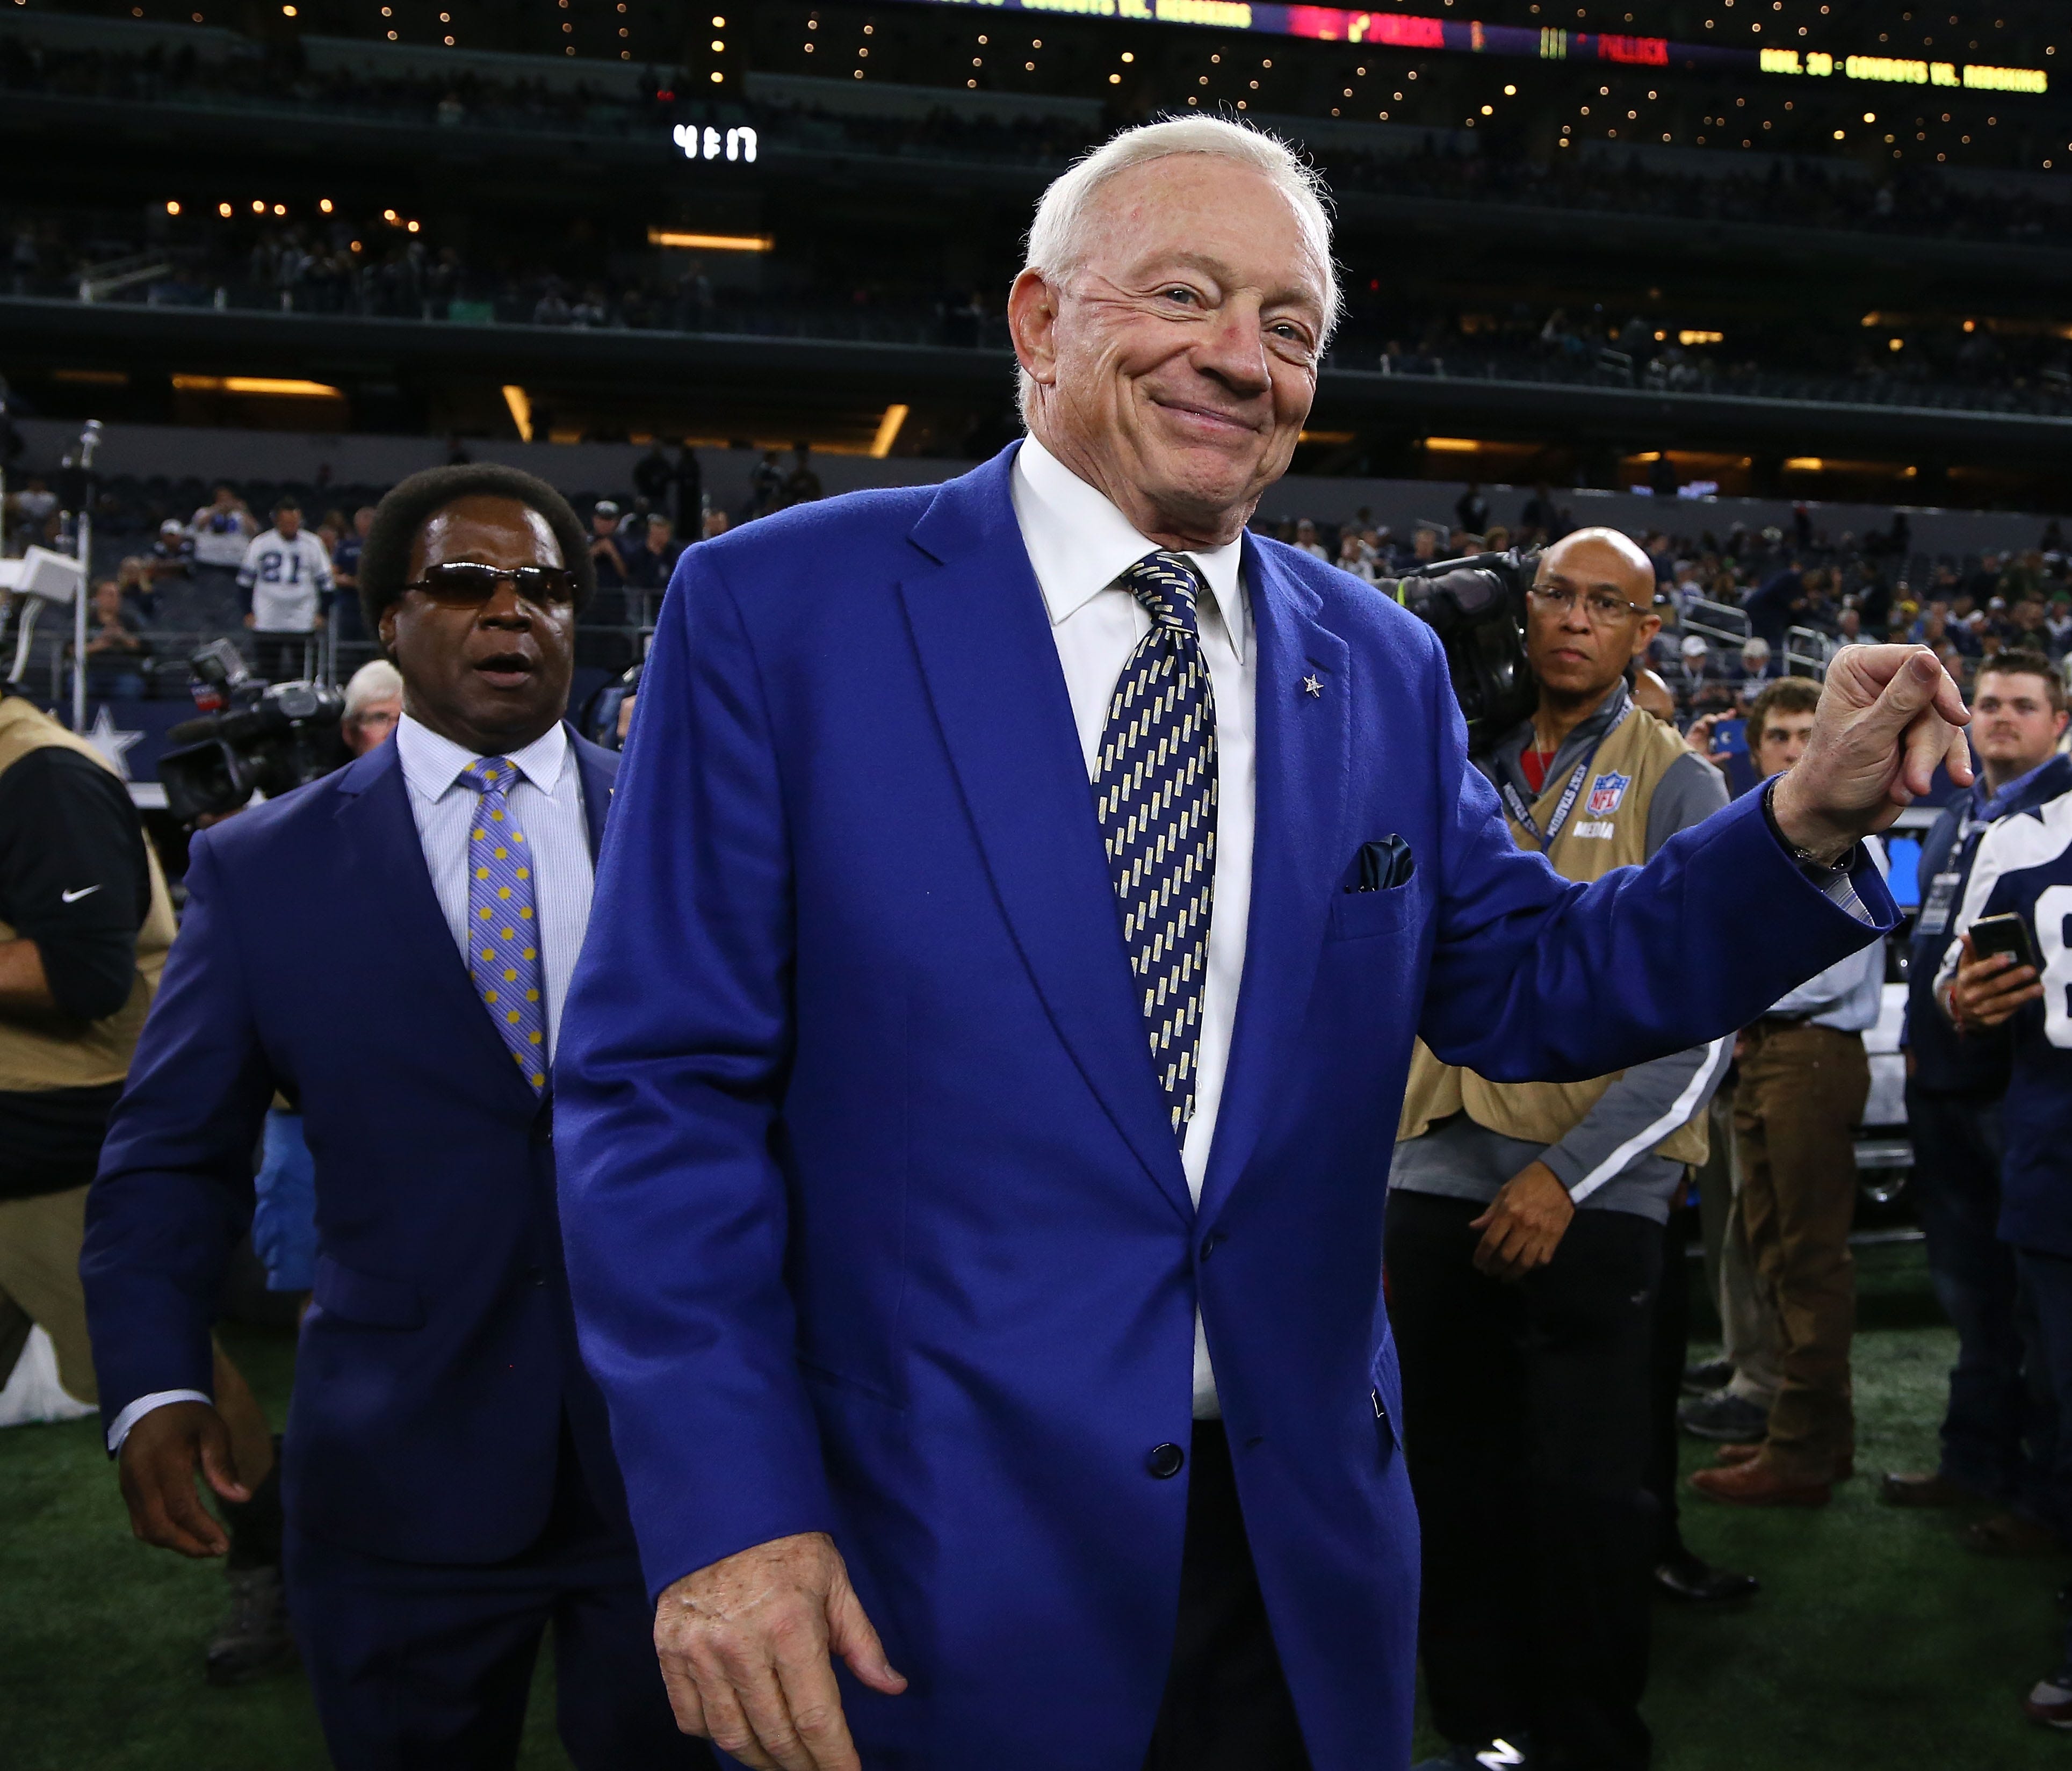 Jerry Jones, owner of the Dallas Cowboys, walks on the field before the game against the Philadelphia Eagles at AT&T Stadium on November 19, 2017 in Arlington, Texas.